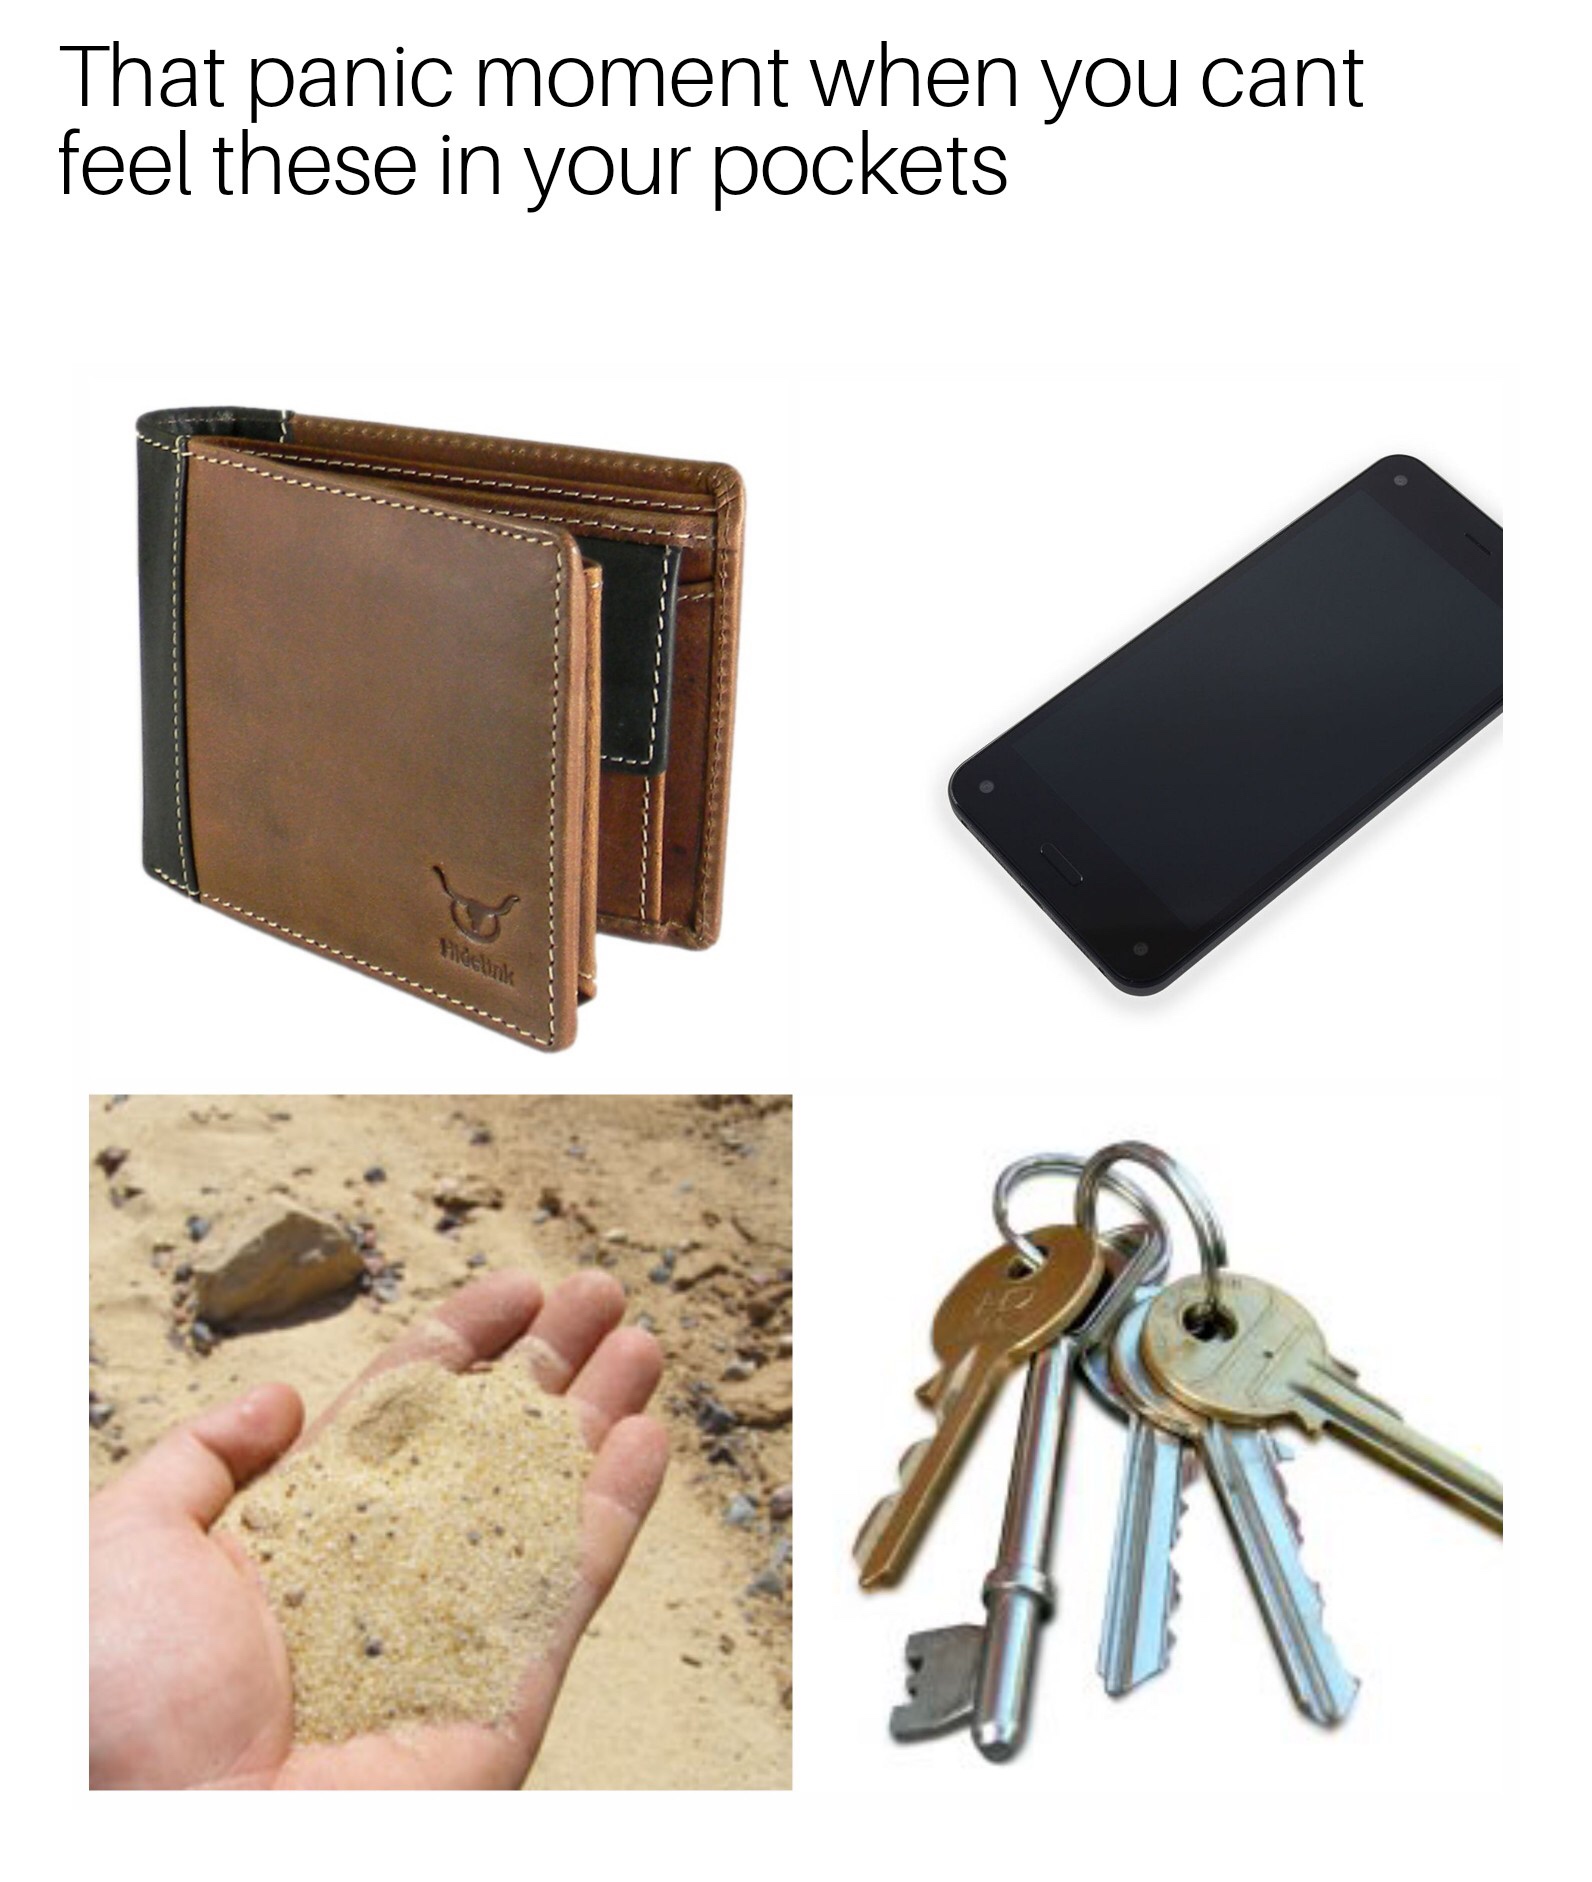 dank meme - Lock and key - That panic moment when you cant feel these in your pockets